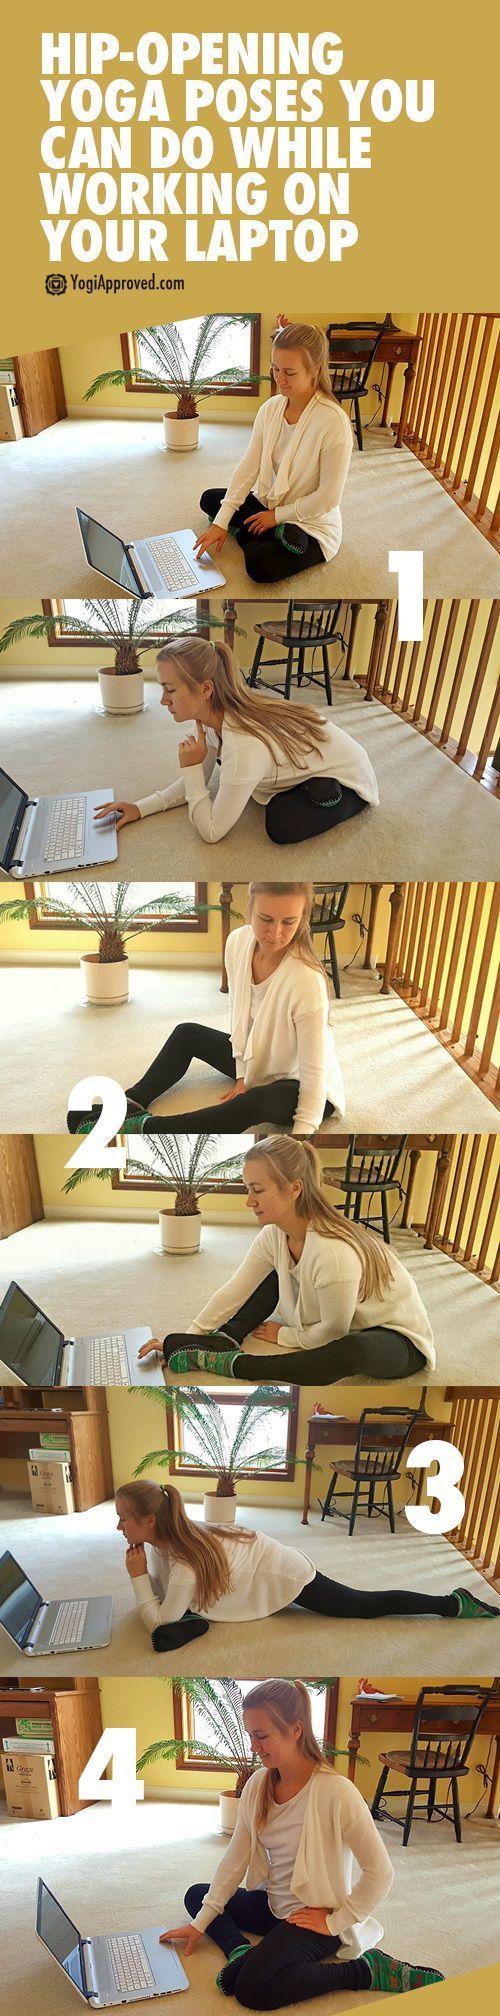 4 Hip-Opening Yoga Poses You Can Do While Working on Your Laptop